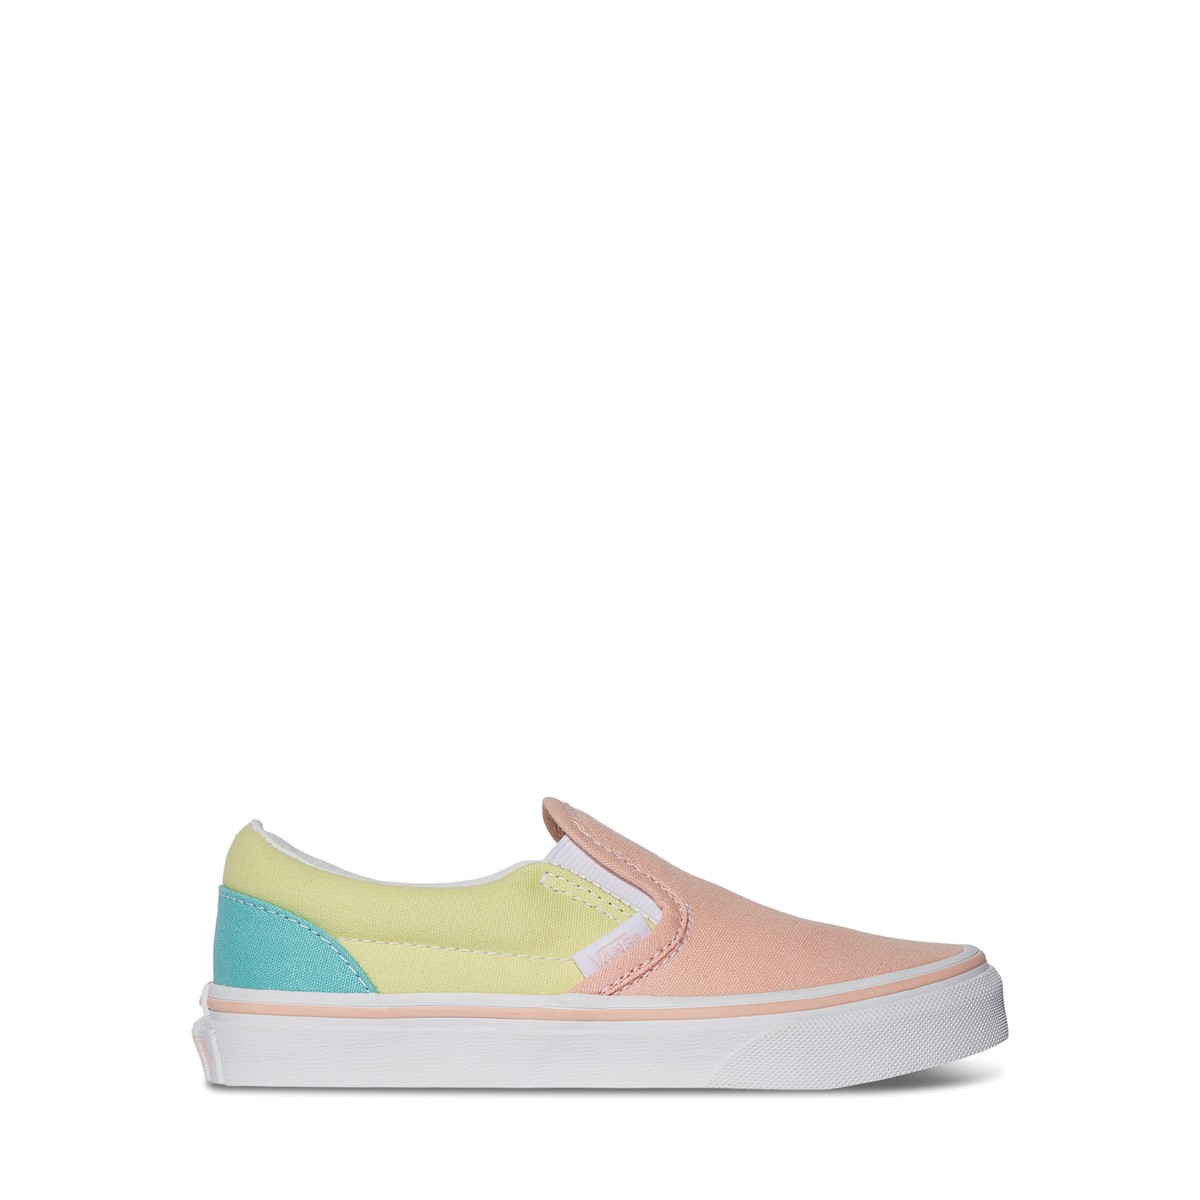 Little Kids' Slip-On Shoes in Peach/Yellow/White